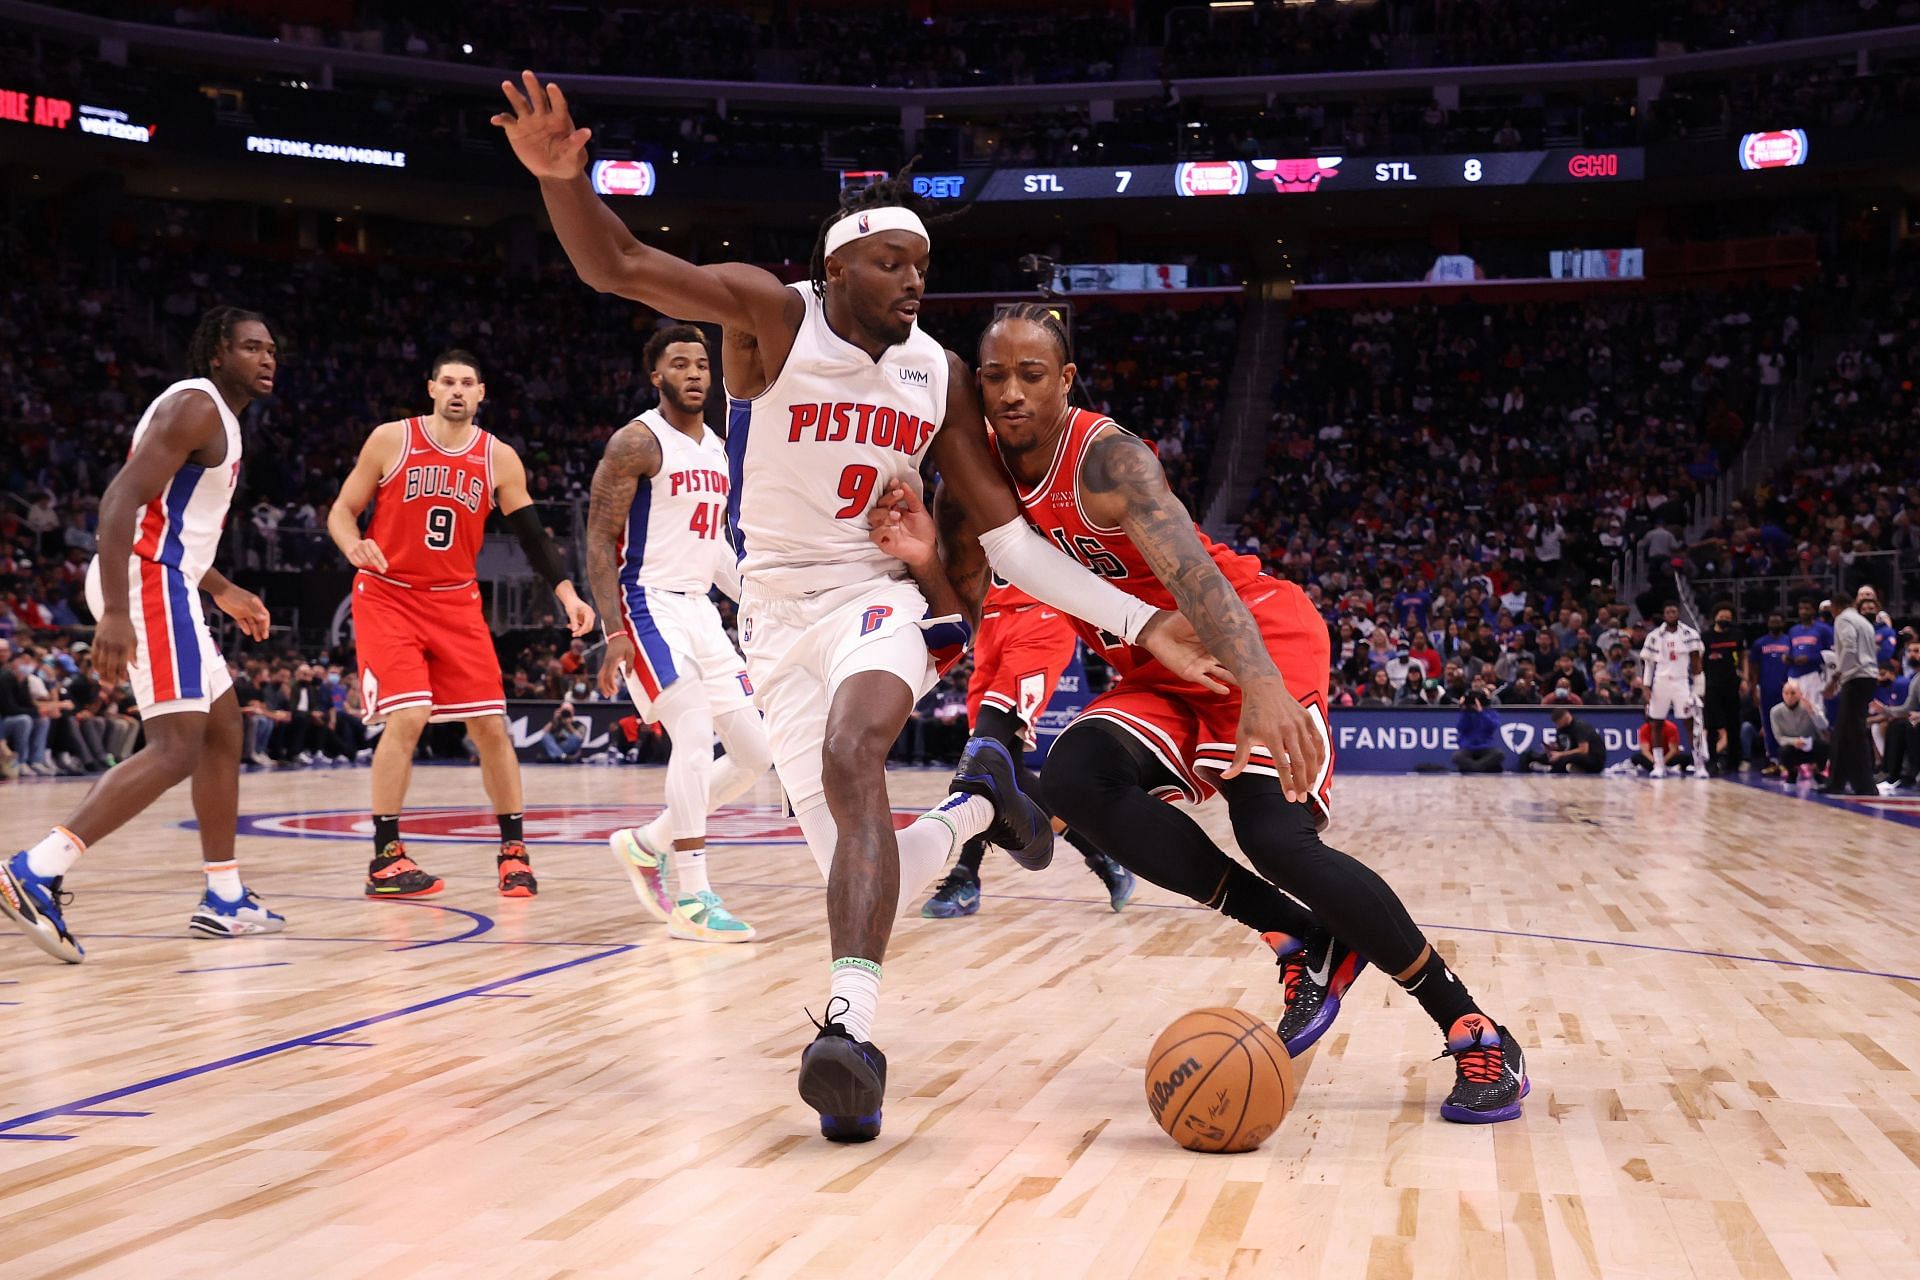 The Detroit Pistons will try to avenge their season-opening loss to the Chicago Bulls when they meet again on Saturday